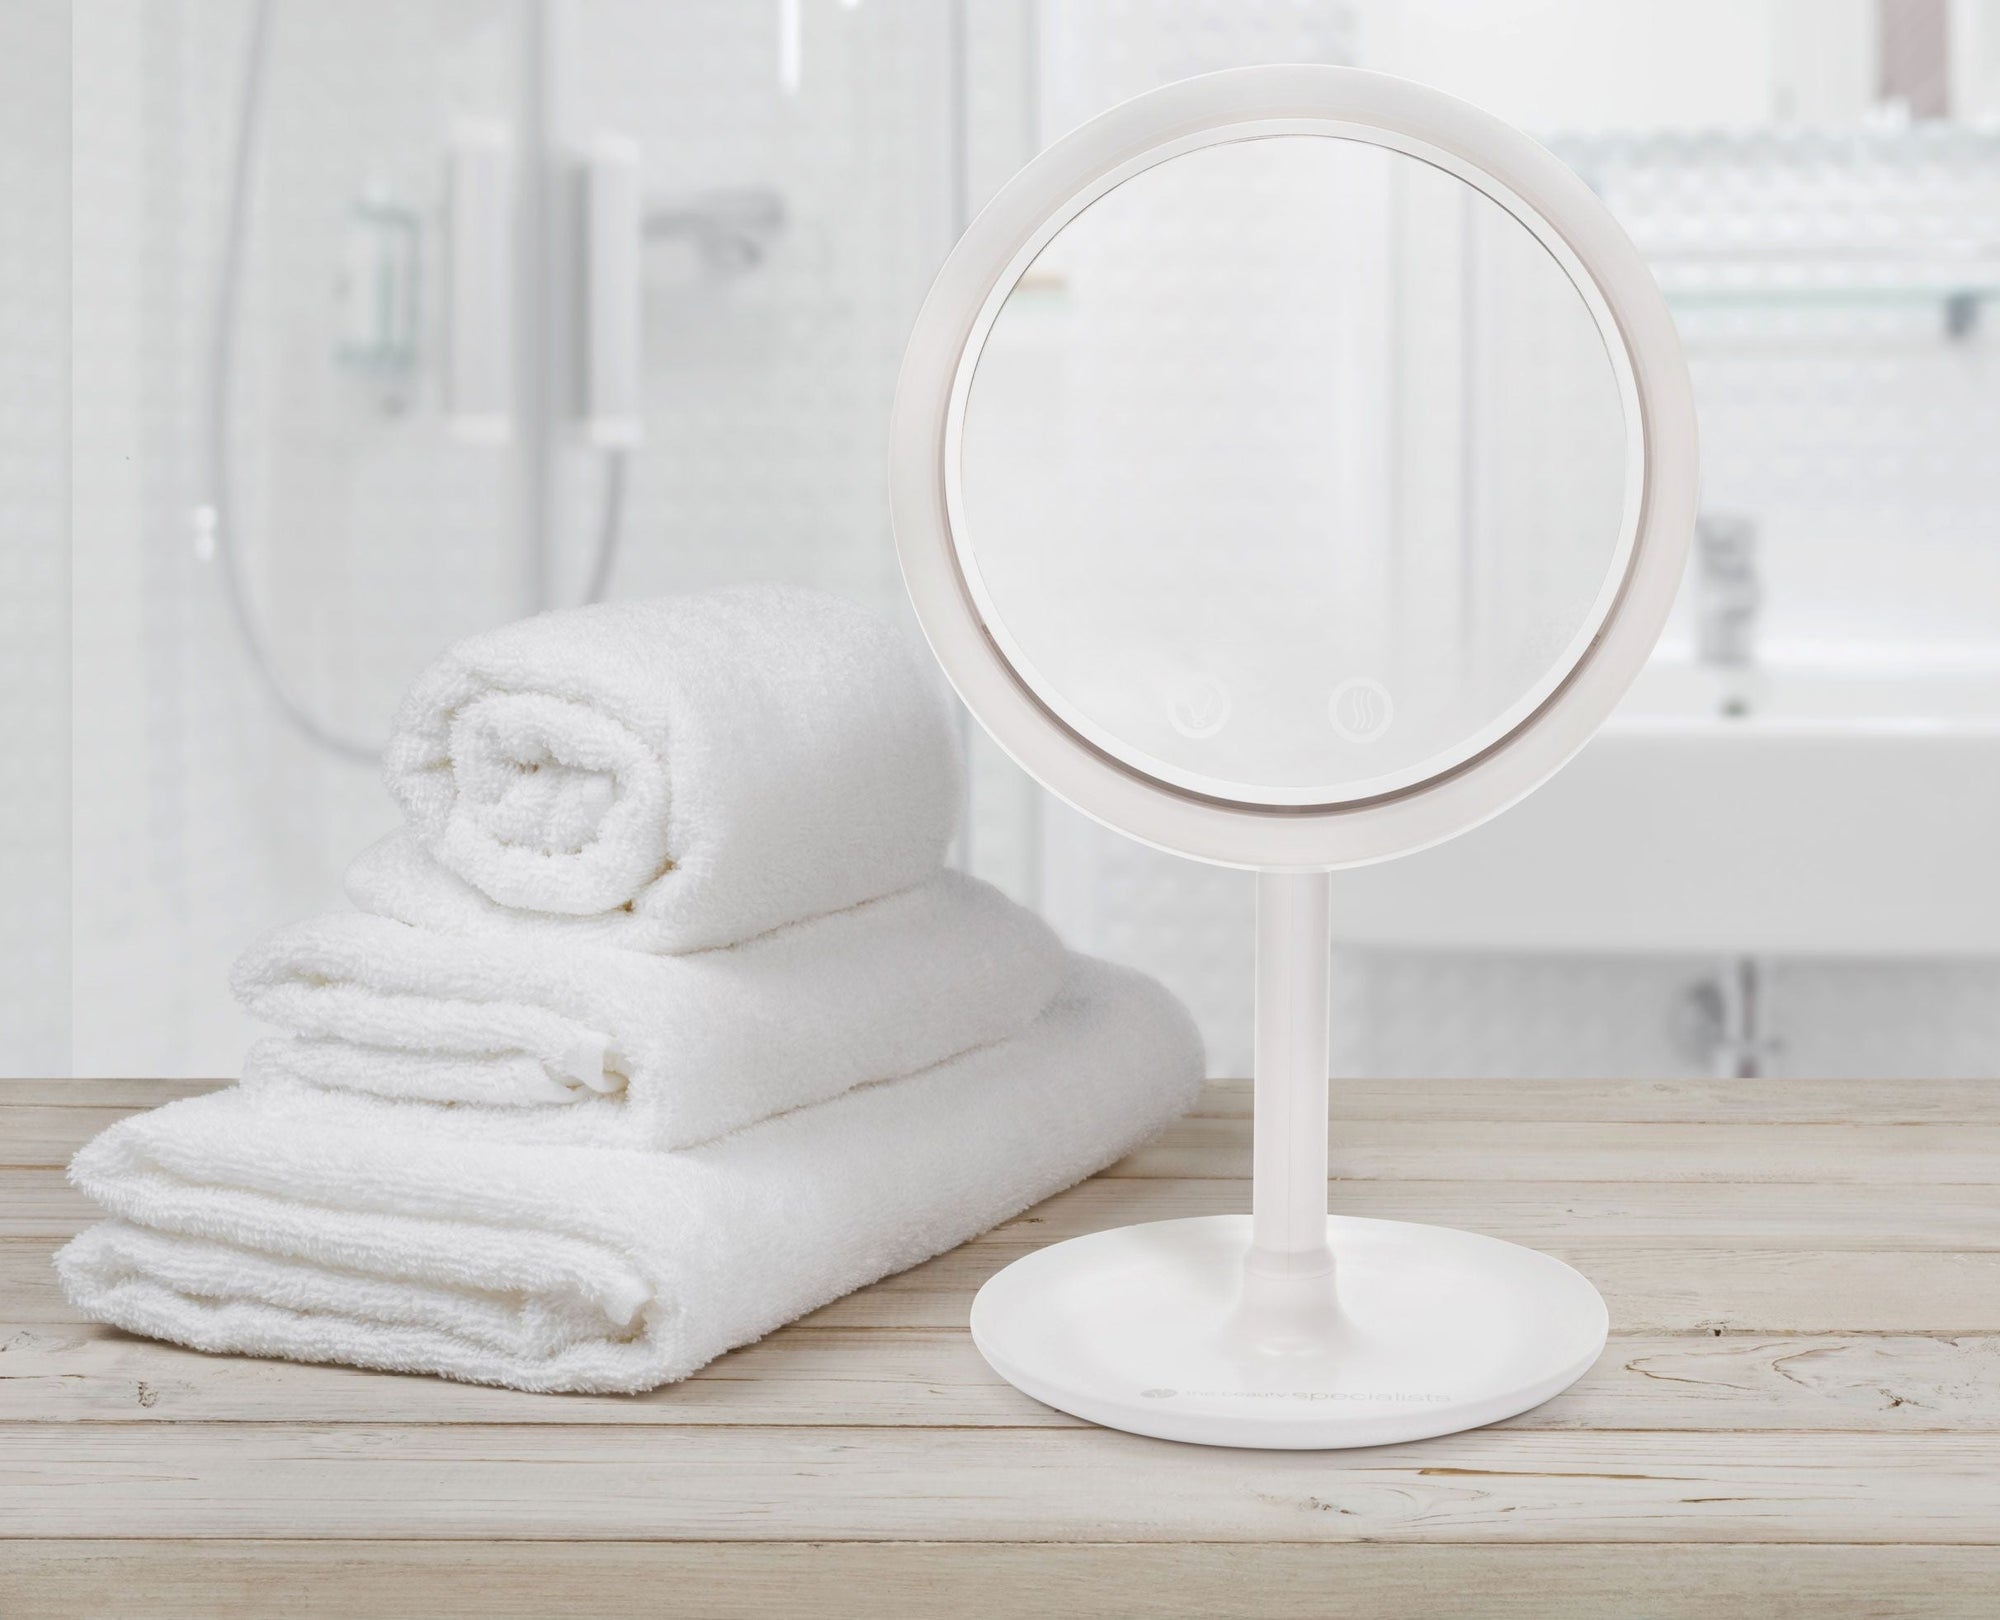 keep cool mirror with fan & led light ring placed on ledge in bright bathroom setting with while fluffy folded towels 